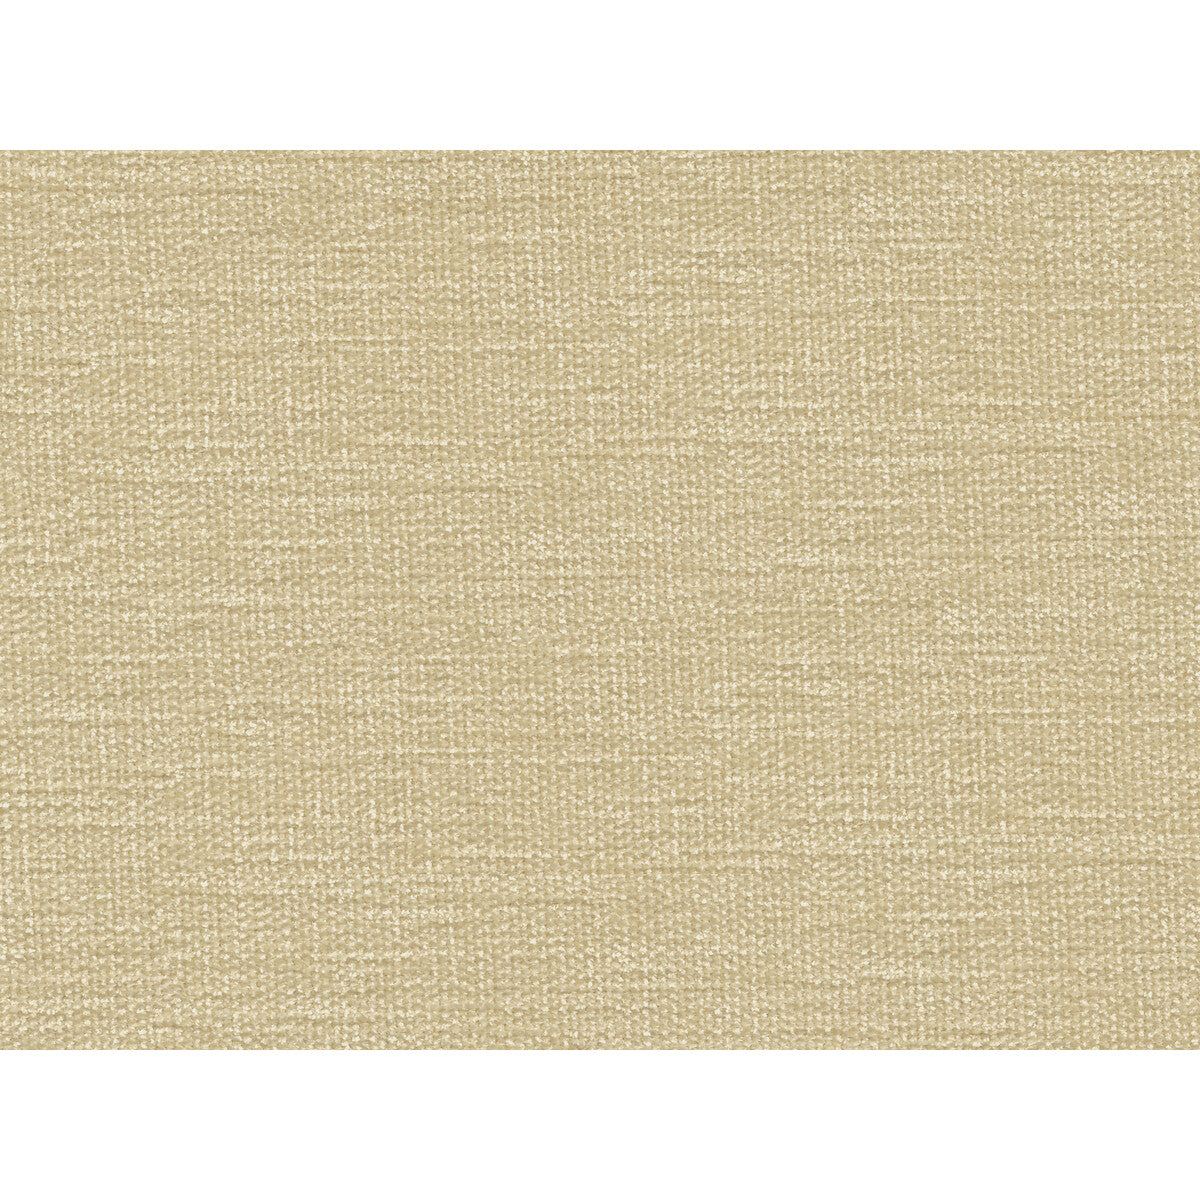 Kravet Contract fabric in 34961-1116 color - pattern 34961.1116.0 - by Kravet Contract in the Performance Kravetarmor collection